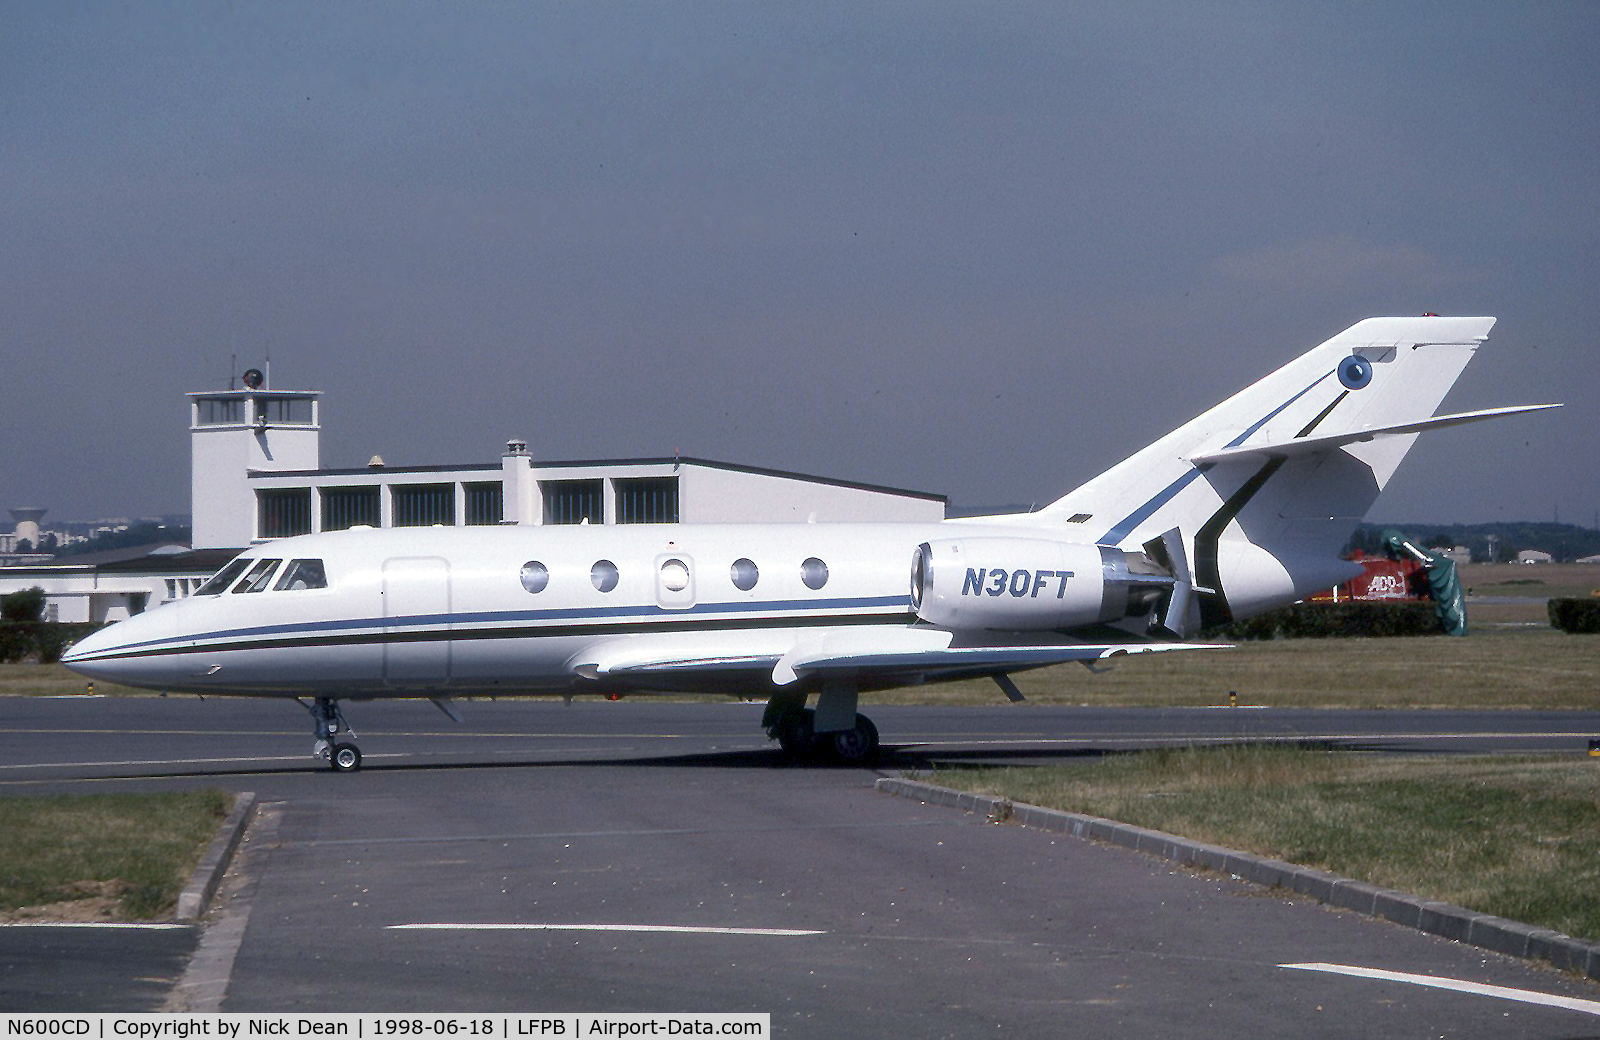 N600CD, 1978 Dassault Falcon 20F-5 (Mystere) C/N 377, LFPB (Seen here as N30FT currently a DA50EX the DA20 is now registered N600CD as posted)